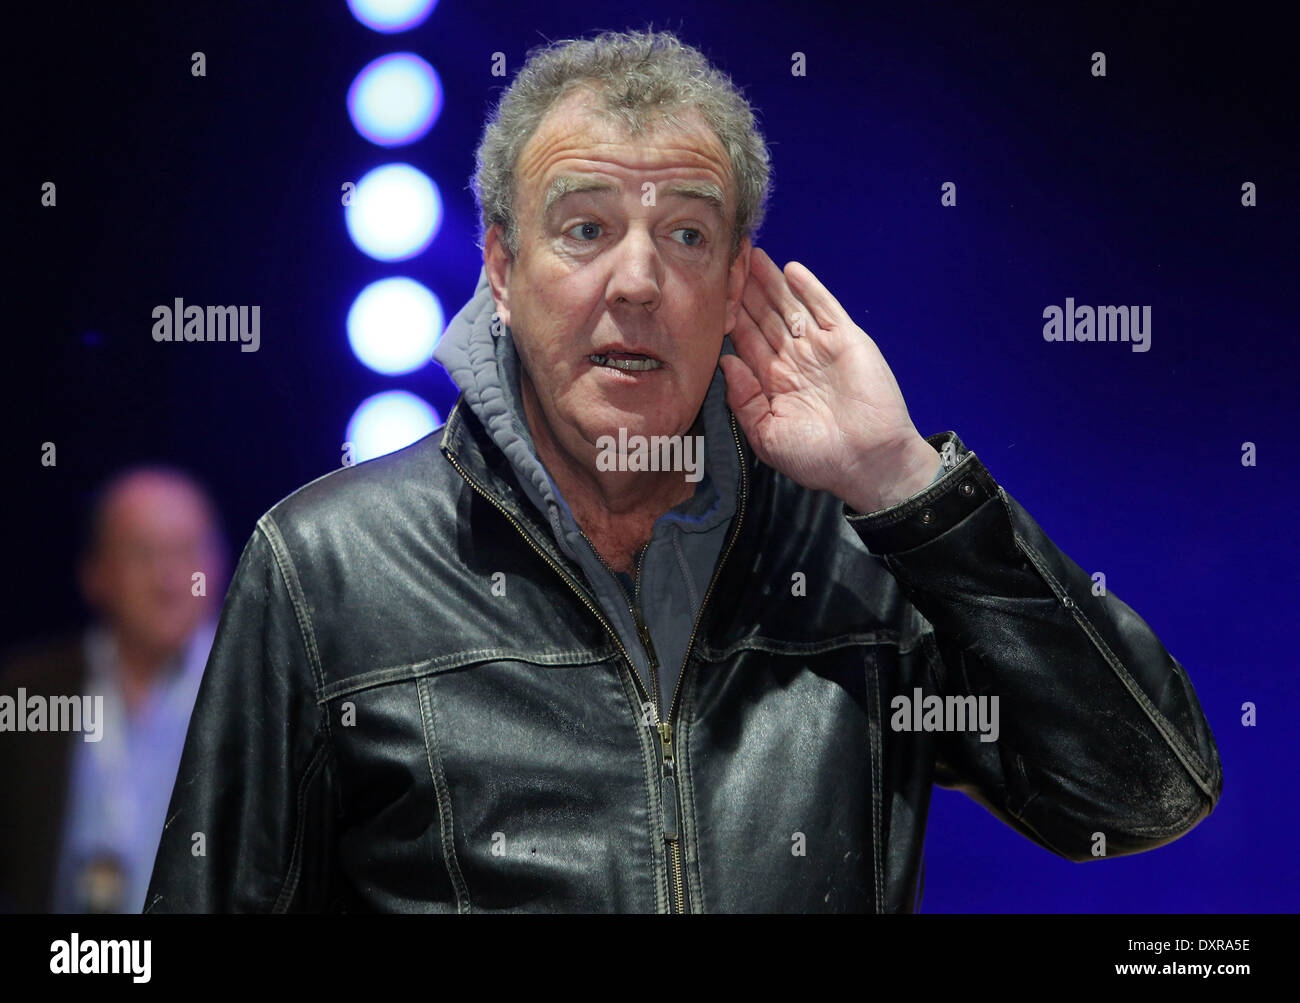 St.Petersburg, Russia. 29th Mar, 2014. British TV anchor of Top Gear Jeremy  Clarkson during the rehearsal of the car show Top Gear Live, in St  Petersburg, Russia, on March 29, 2014. British